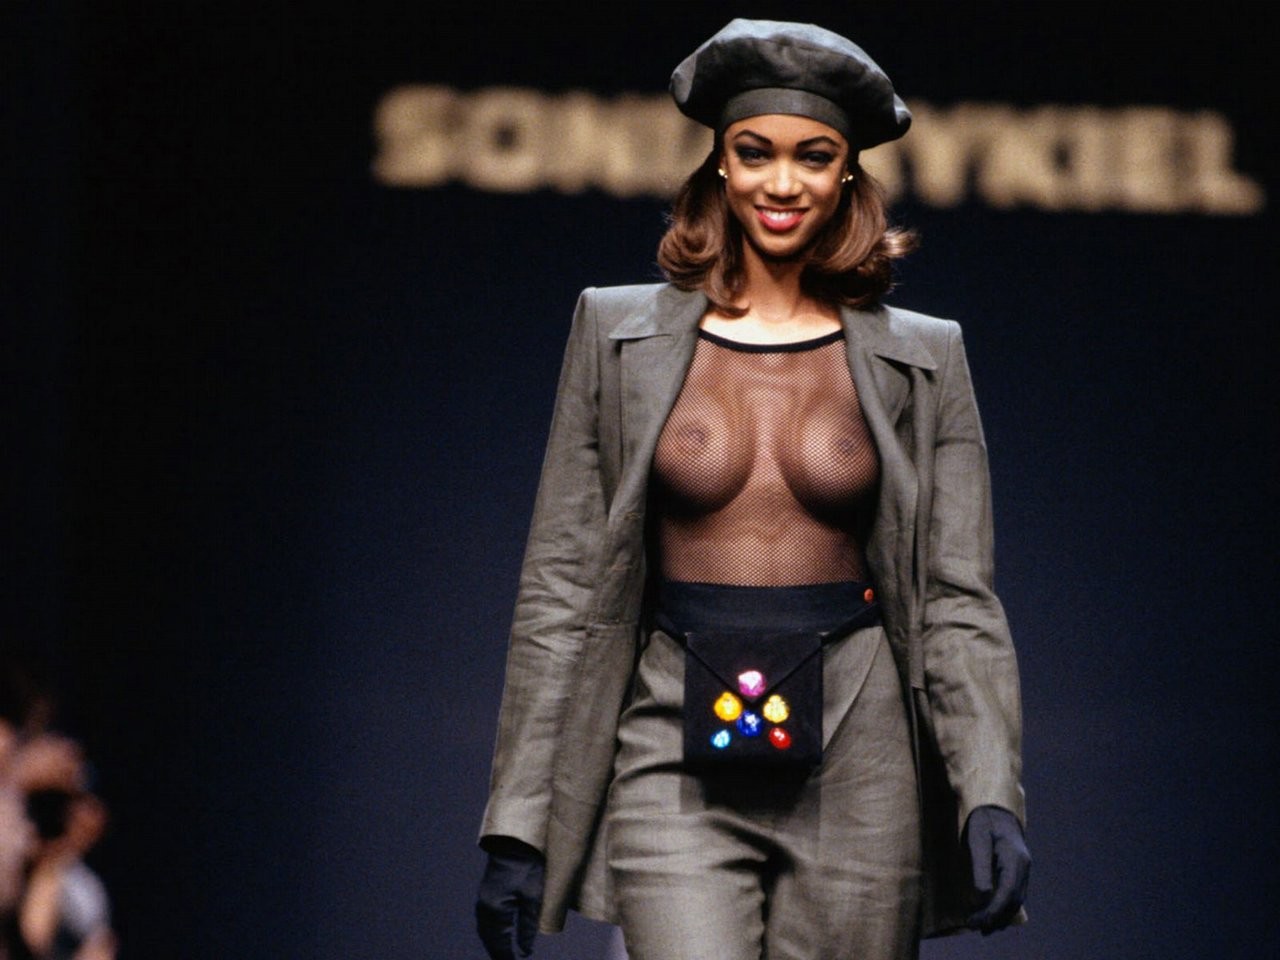 talkshow host and model Tyra Banks shows us her brown nipples #72738758